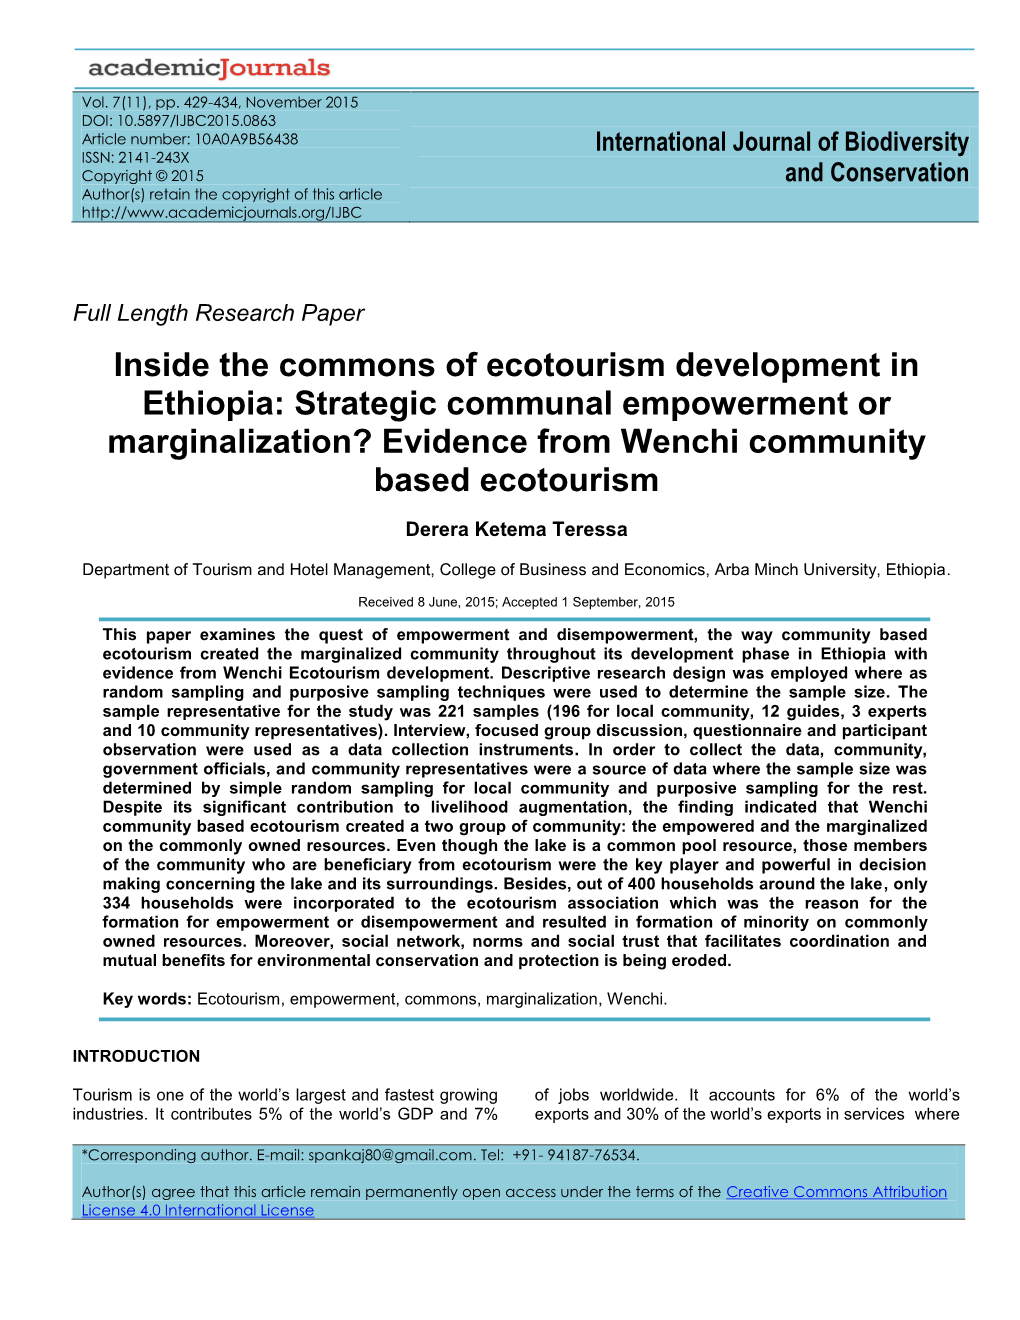 Inside the Commons of Ecotourism Development in Ethiopia: Strategic Communal Empowerment Or Marginalization? Evidence from Wenchi Community Based Ecotourism